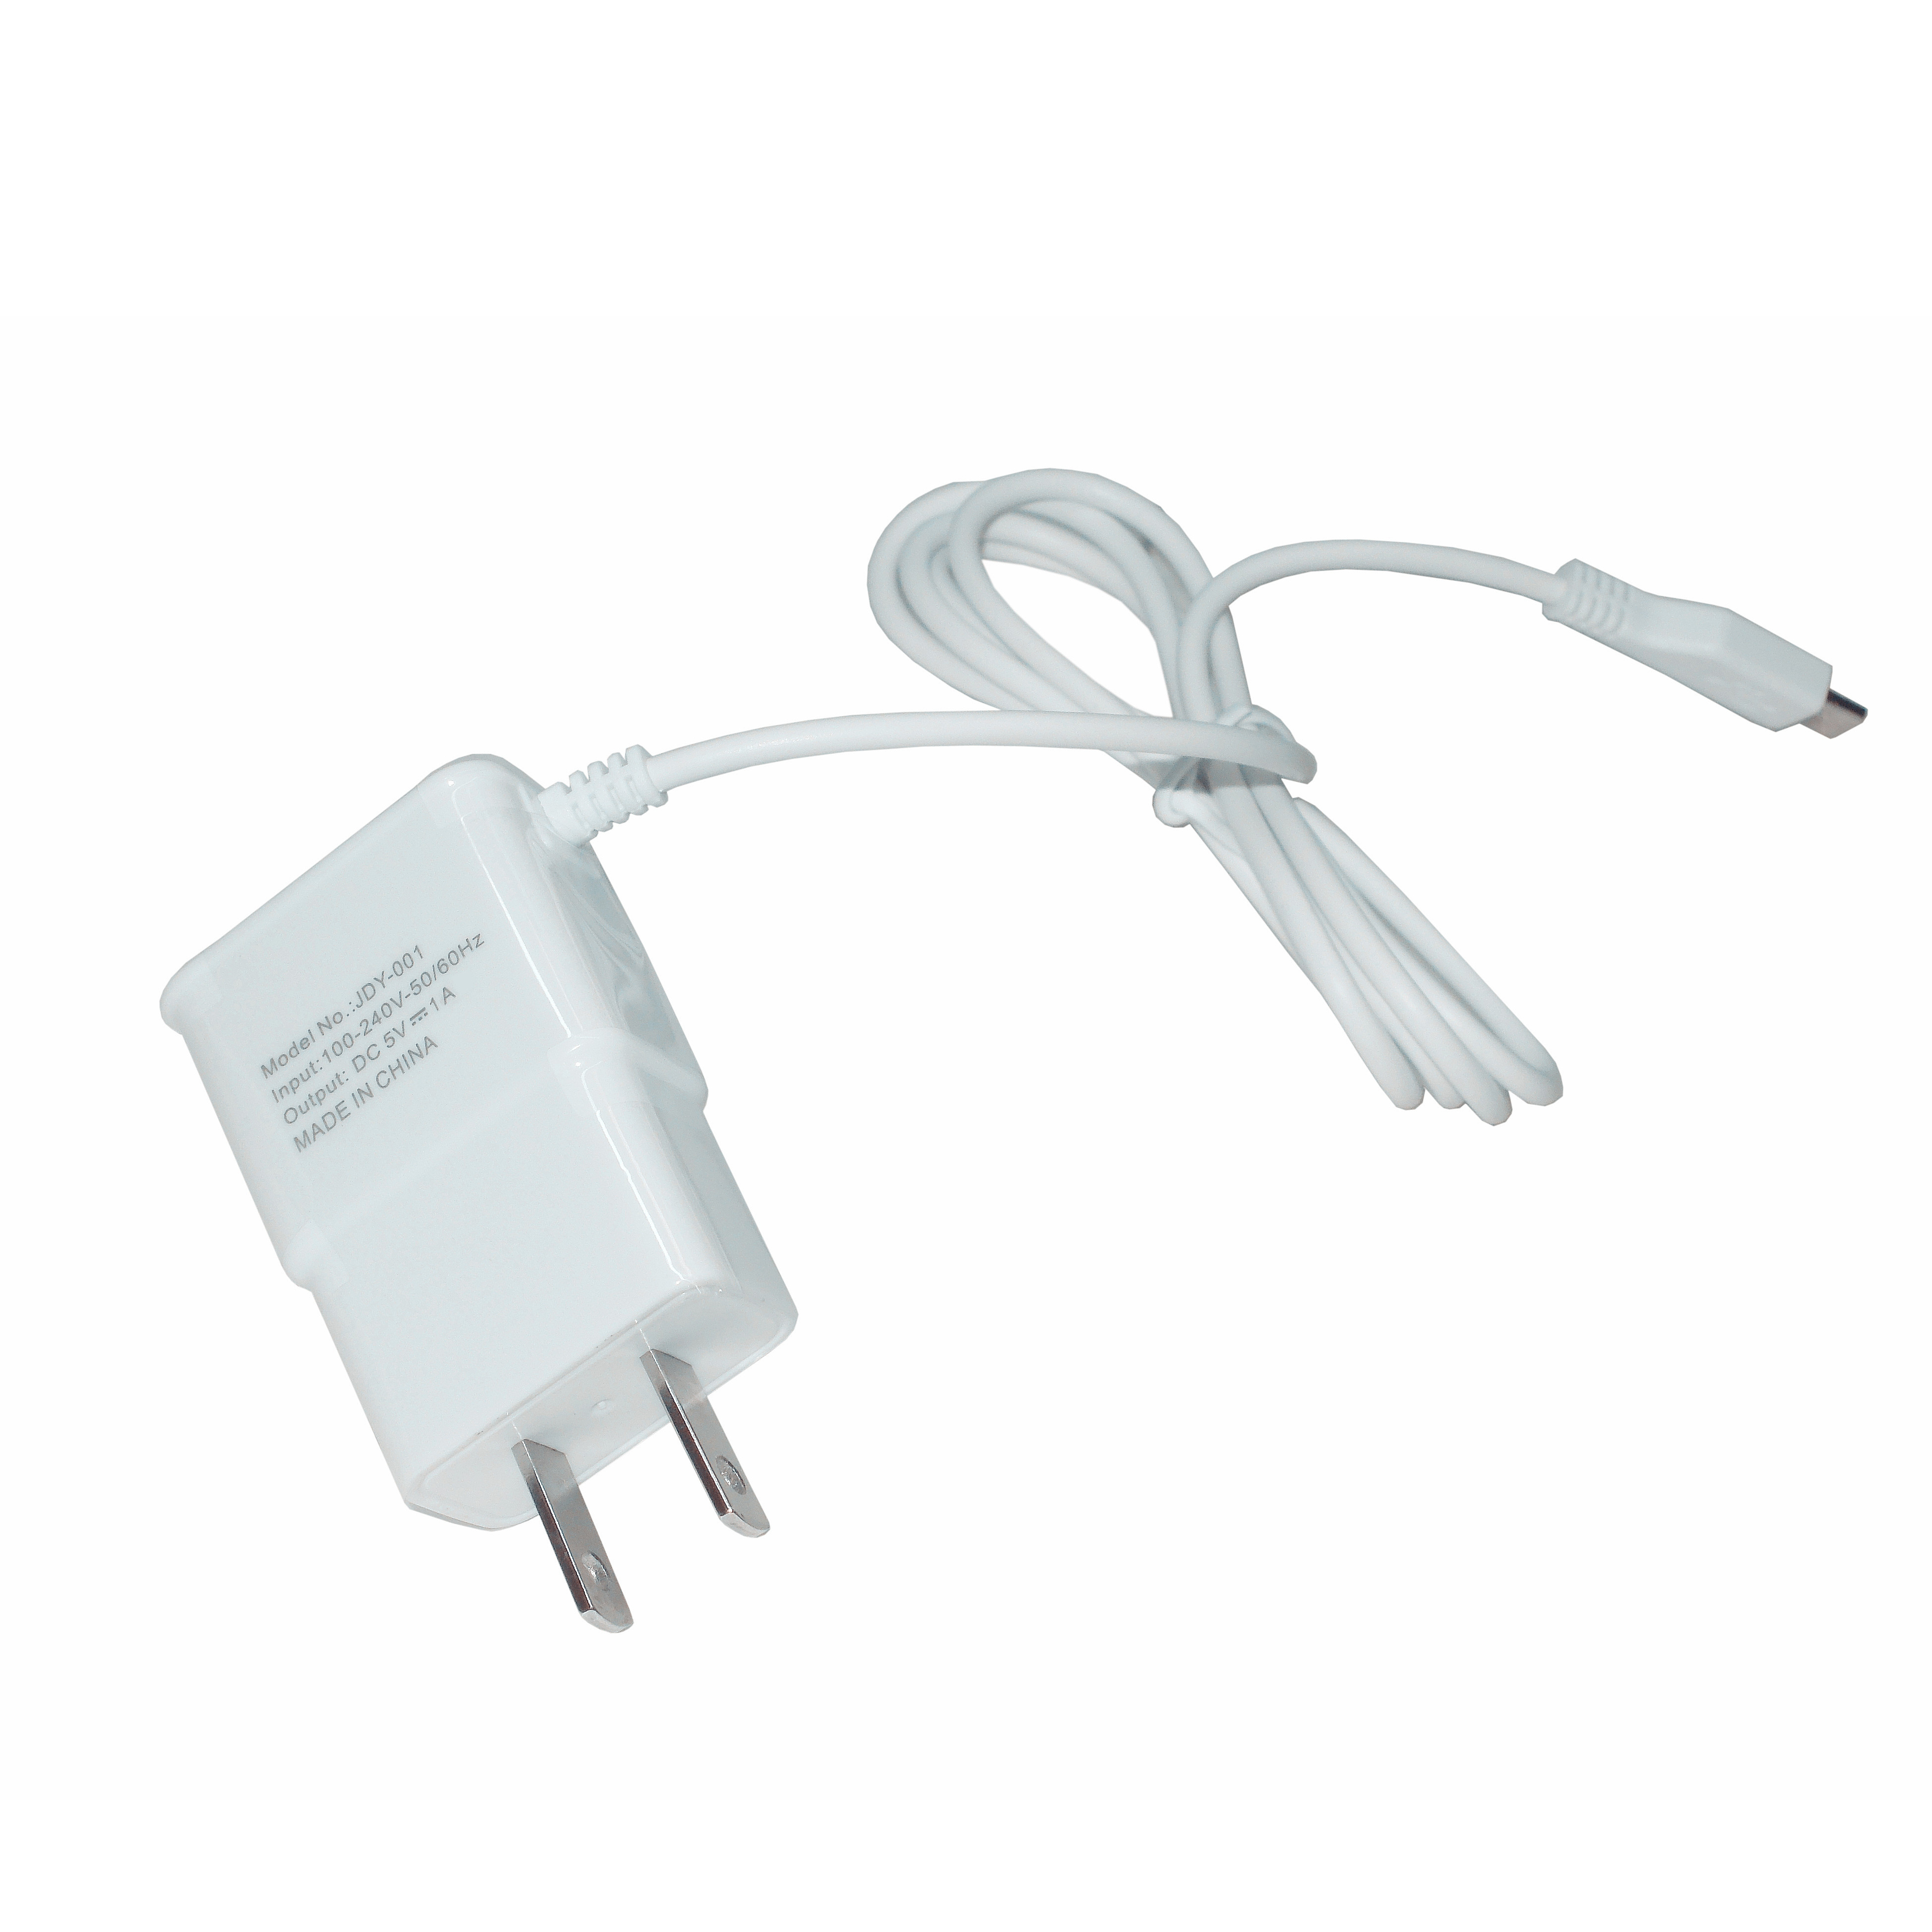 samsung wall charger with cable output 5v/9v/12v usb mobile charger in Europe